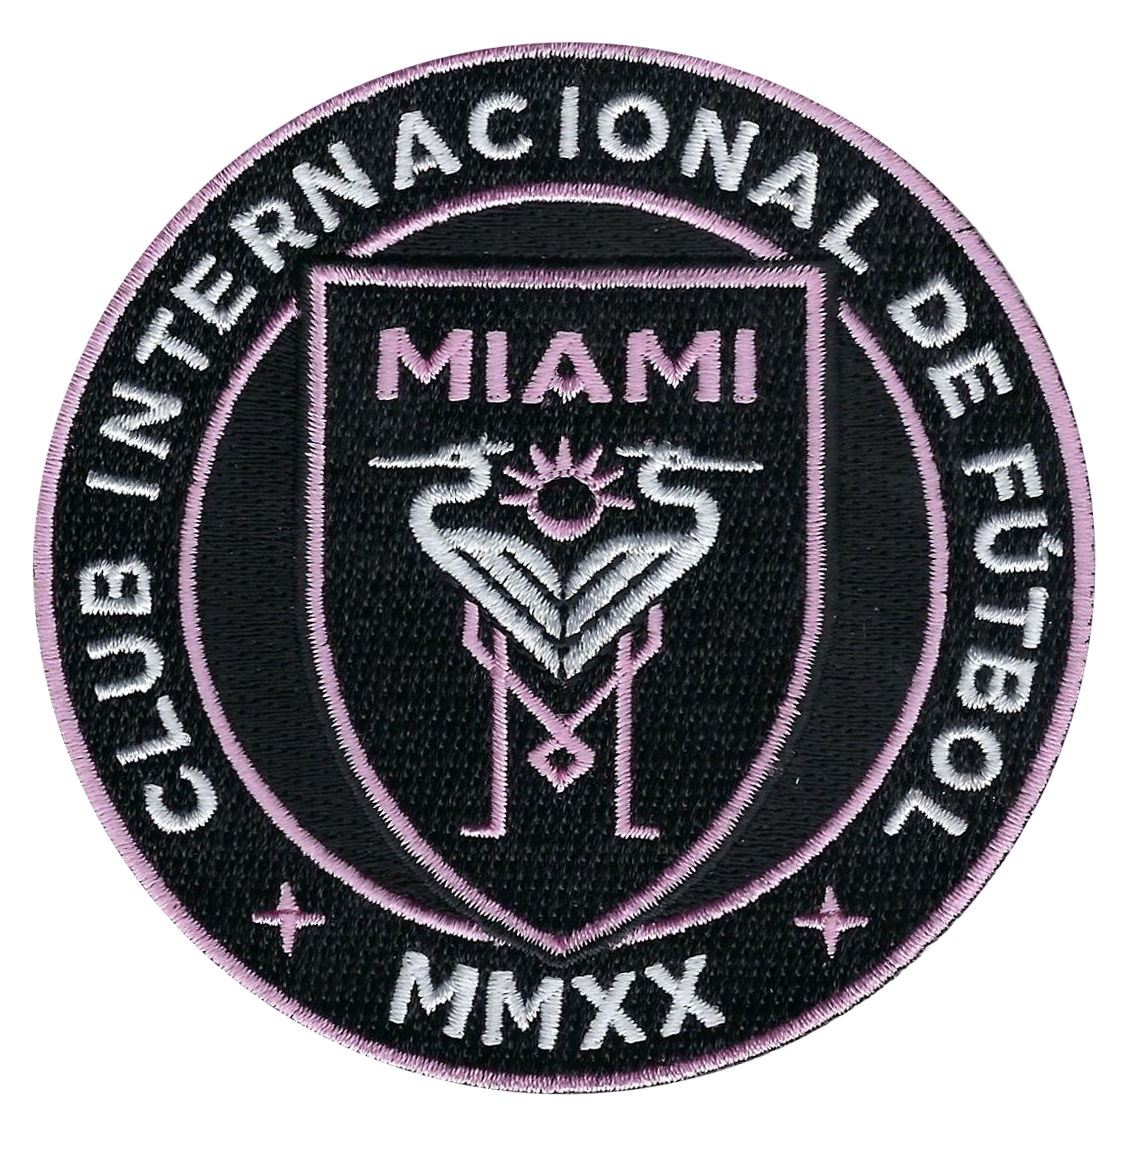 MLS PATCHES/EASTERN CONFERENCE/ Inter Miami